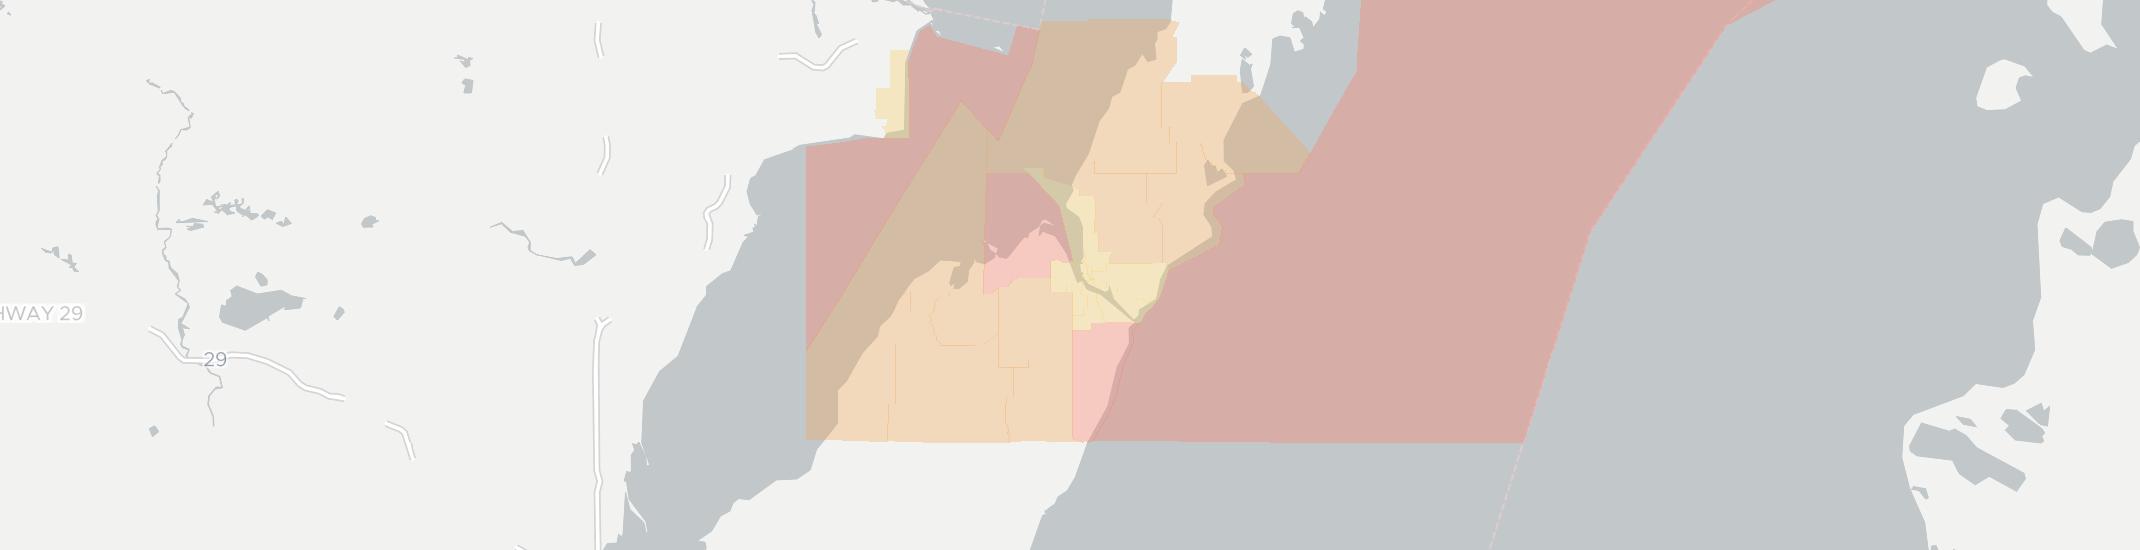 Sturgeon Bay Internet Competition Map. Click for interactive map